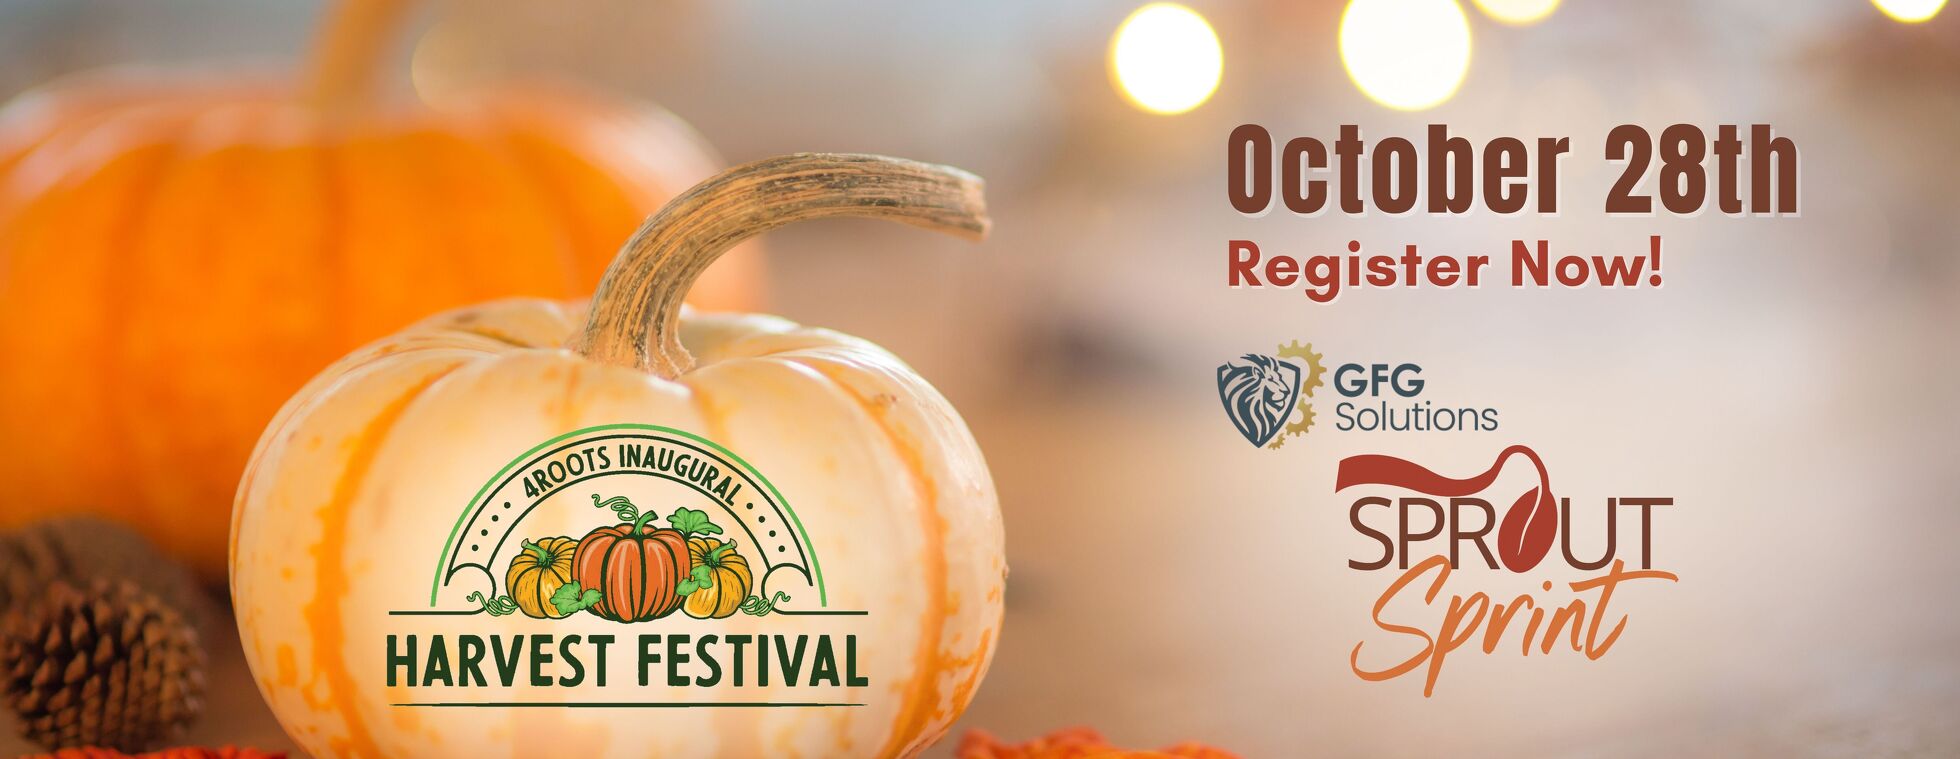 4Roots Harvest Festival and GFG Solutions Sprout Sprint 